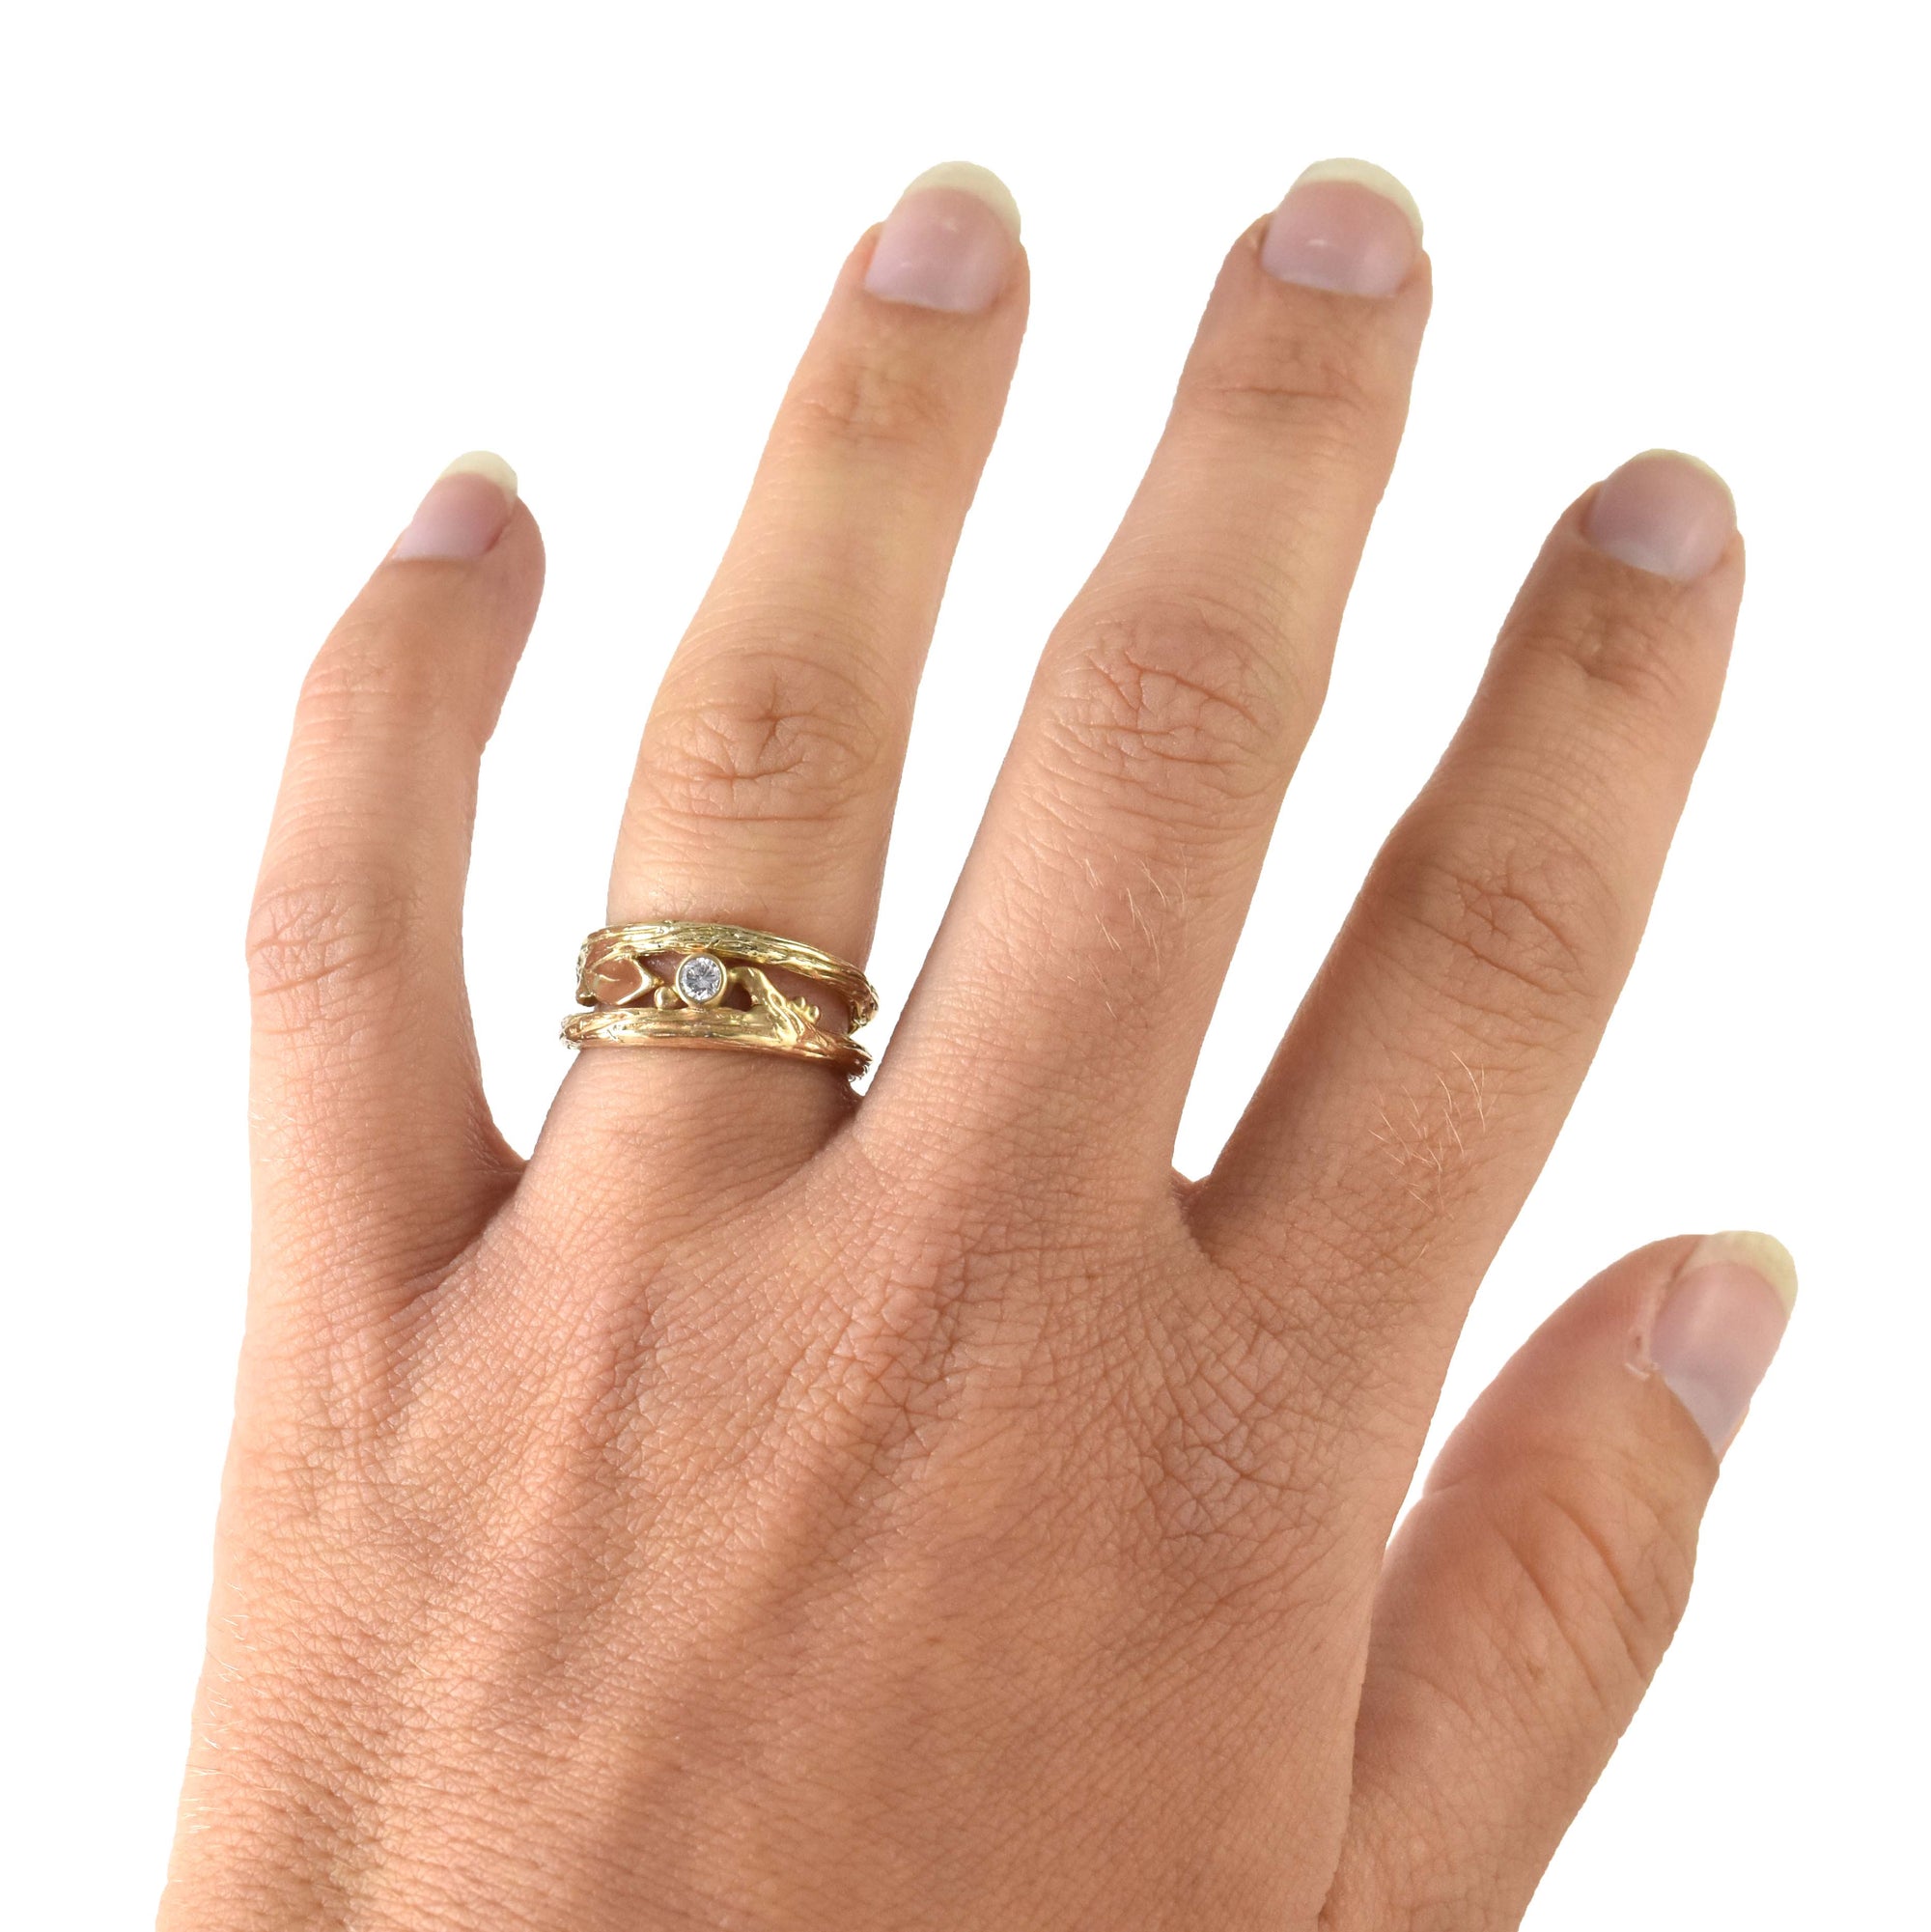 Gold Summer Twig Ring - your choice of gold - Wedding Ring  14K Yellow Gold  18K Palladium White Gold 3907 - handmade by Beth Millner Jewelry